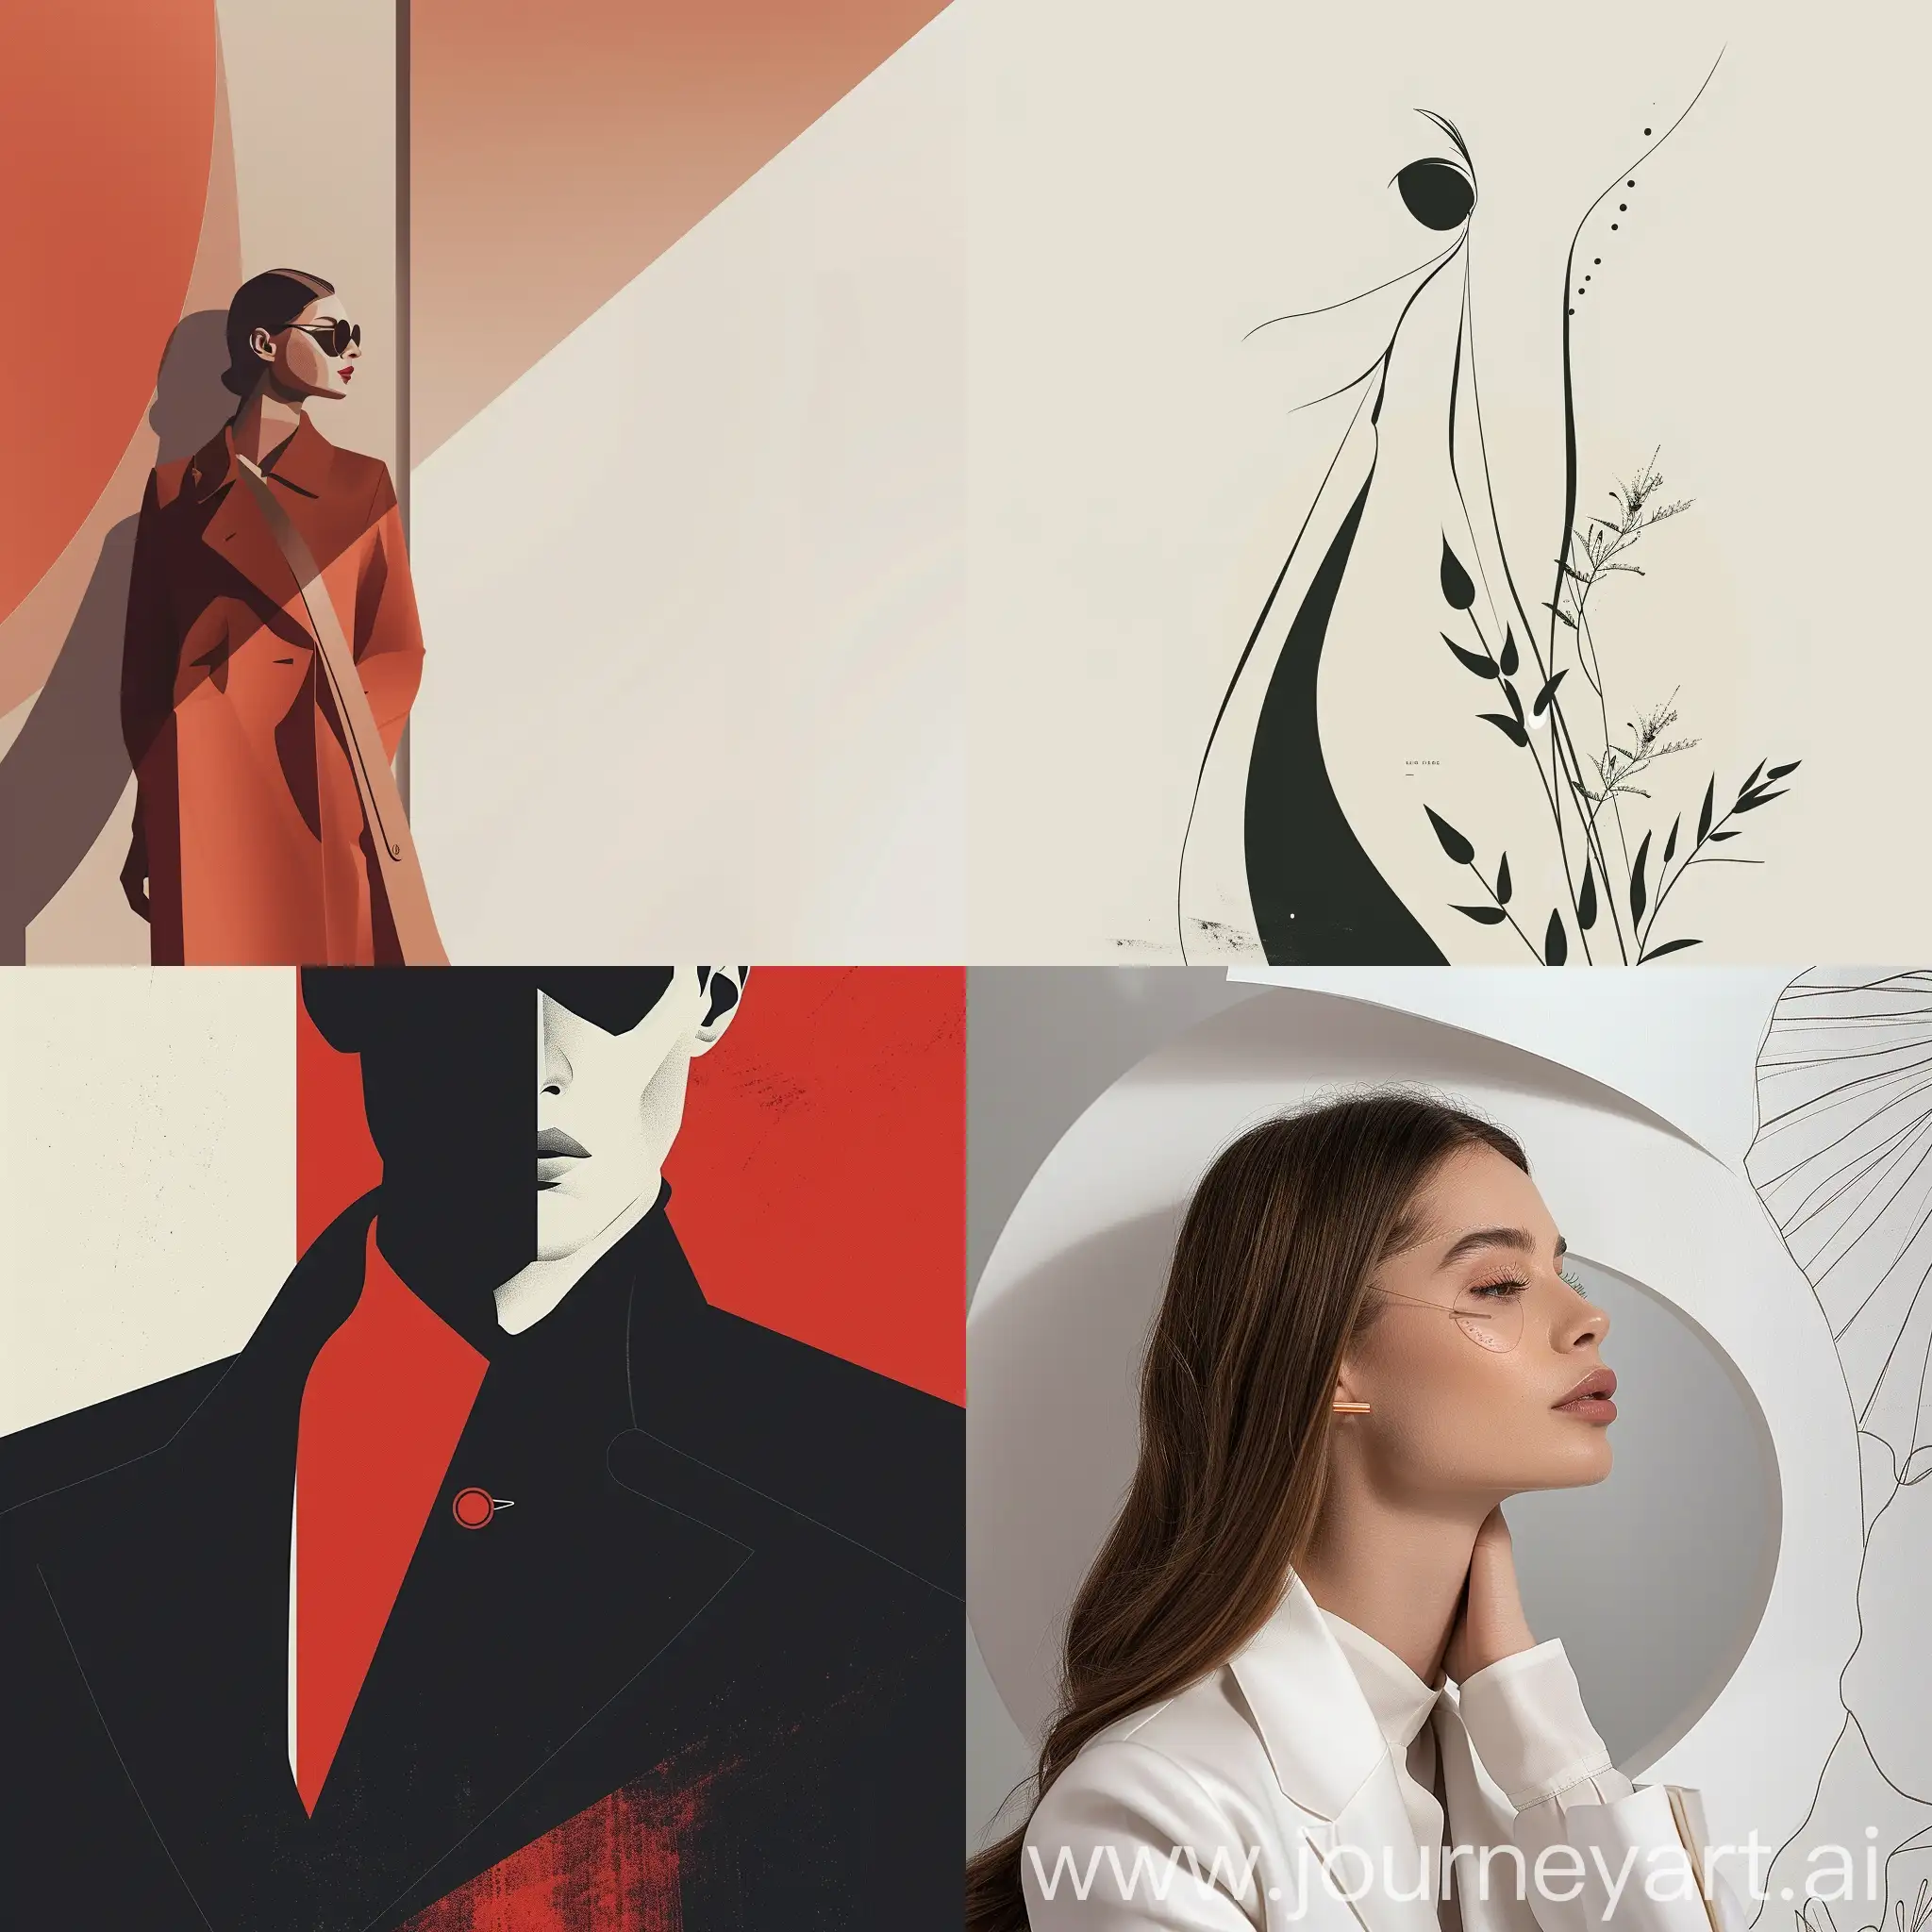 A sleek and sophisticated (((minimalist fashion brand))) ready for its launch, with an eye-catching (((poster))) featuring delicate yet powerful drawings of modern typography and understatedly elegant illustrations, colors of modern luxury providing a timelessly chic aesthetic